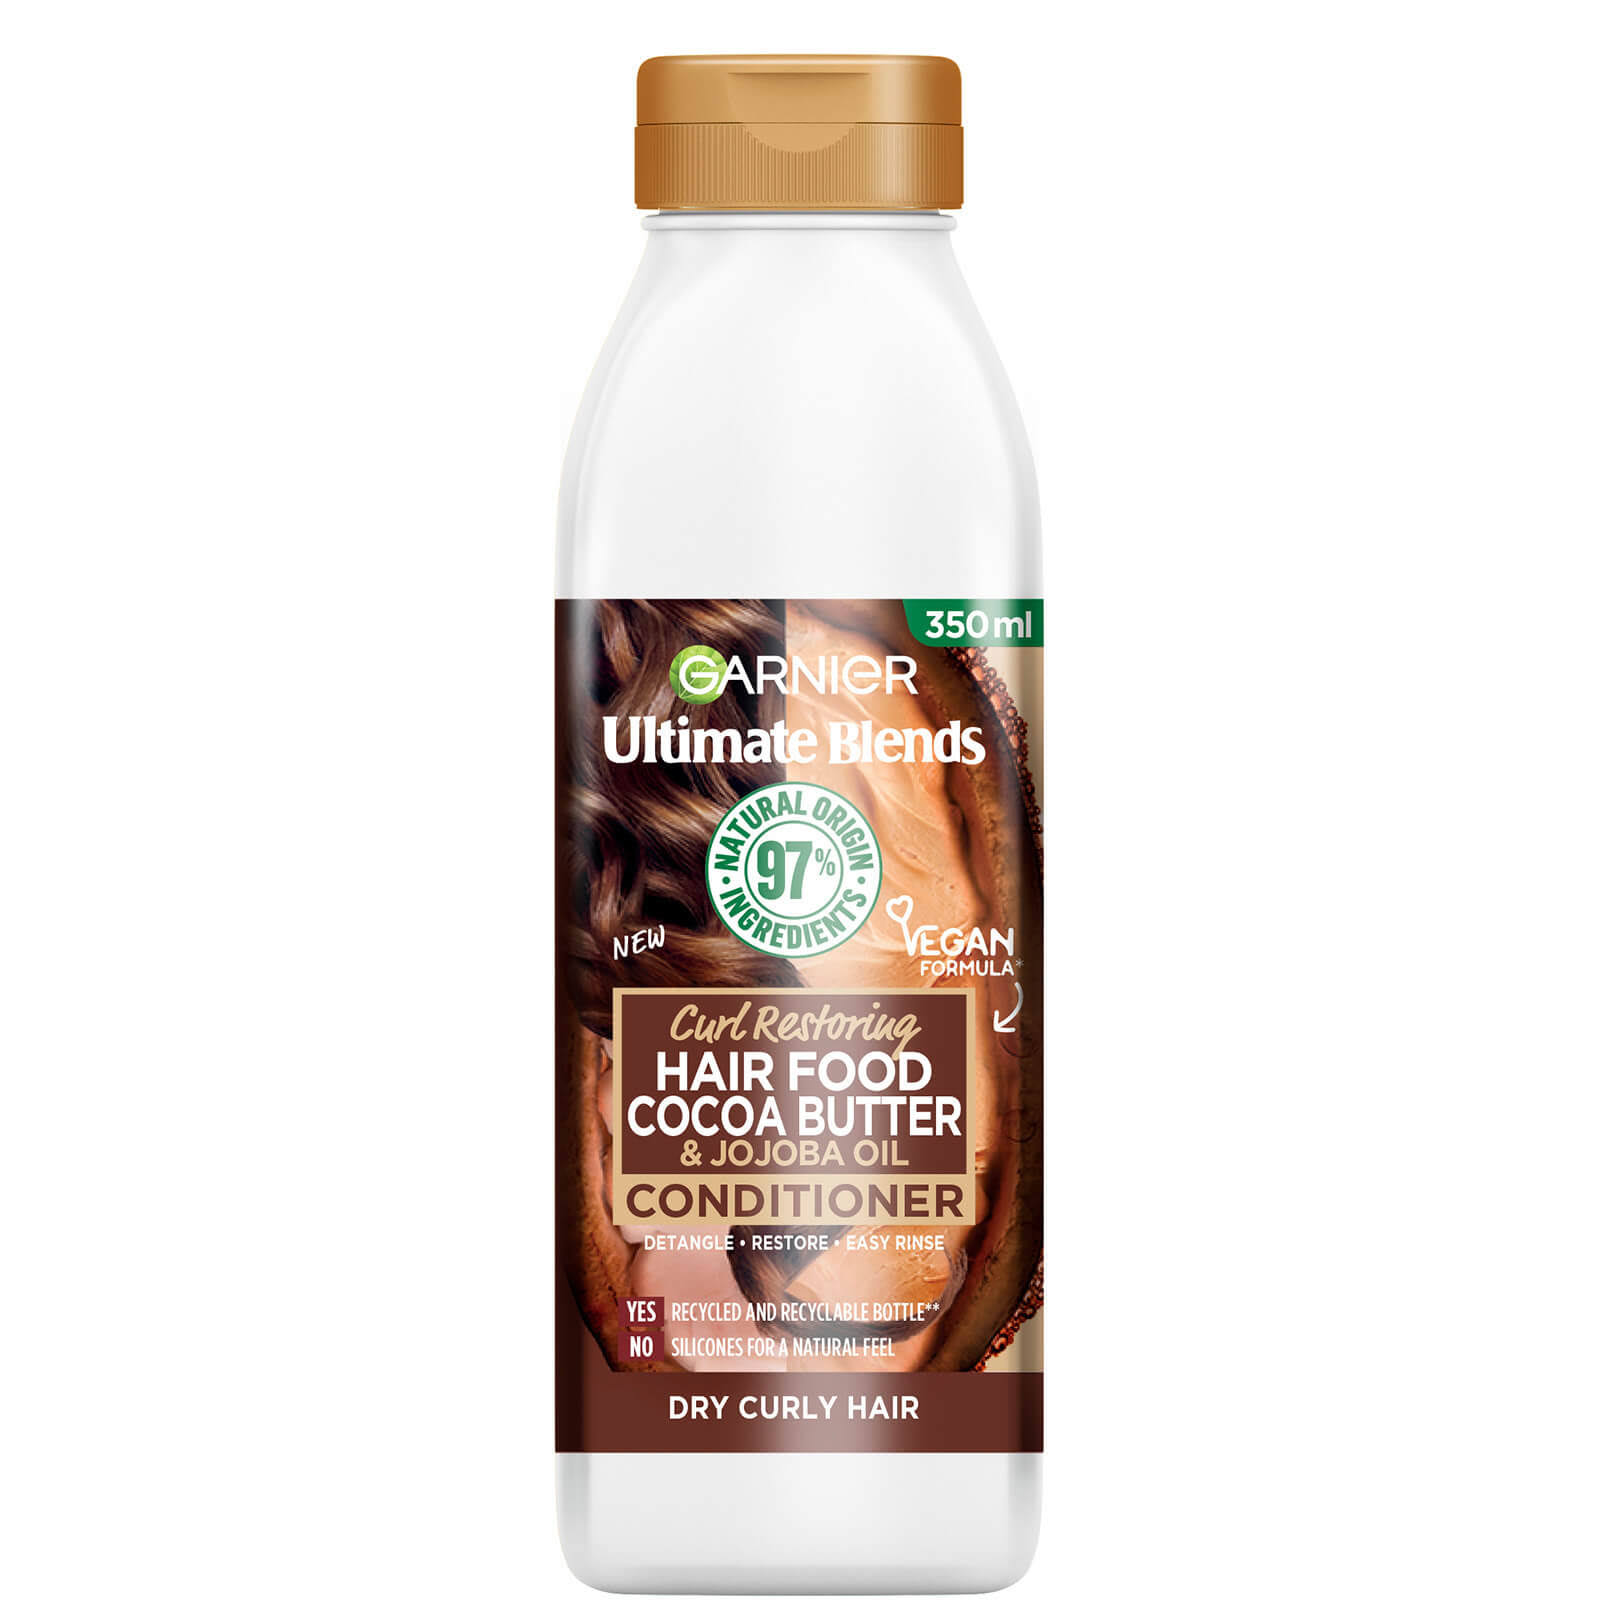 Garnier Ultimate Blends Hair Food Cocoa Butter Conditioner 350ml -